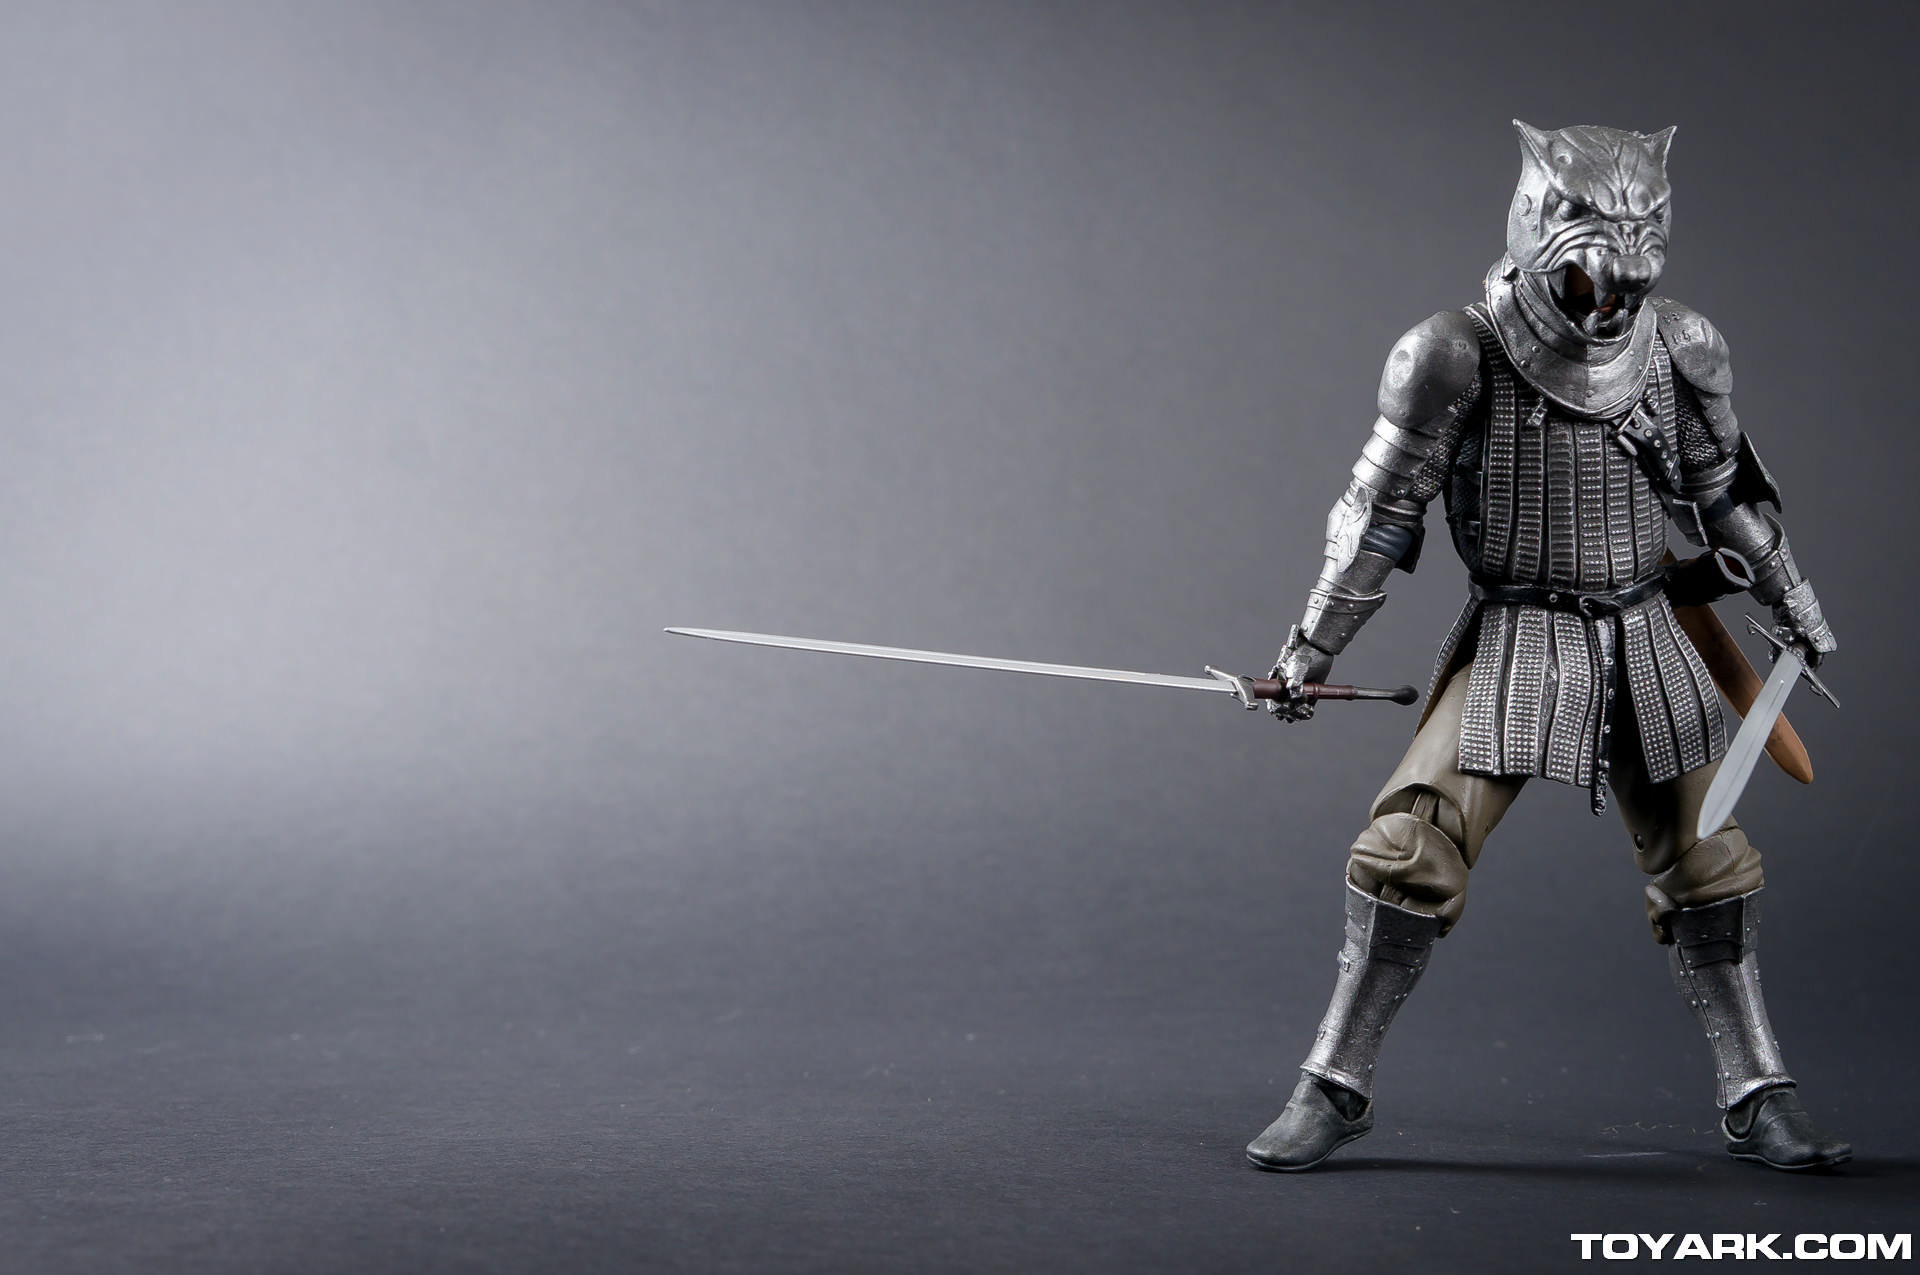 game of thrones legacy collection the hound